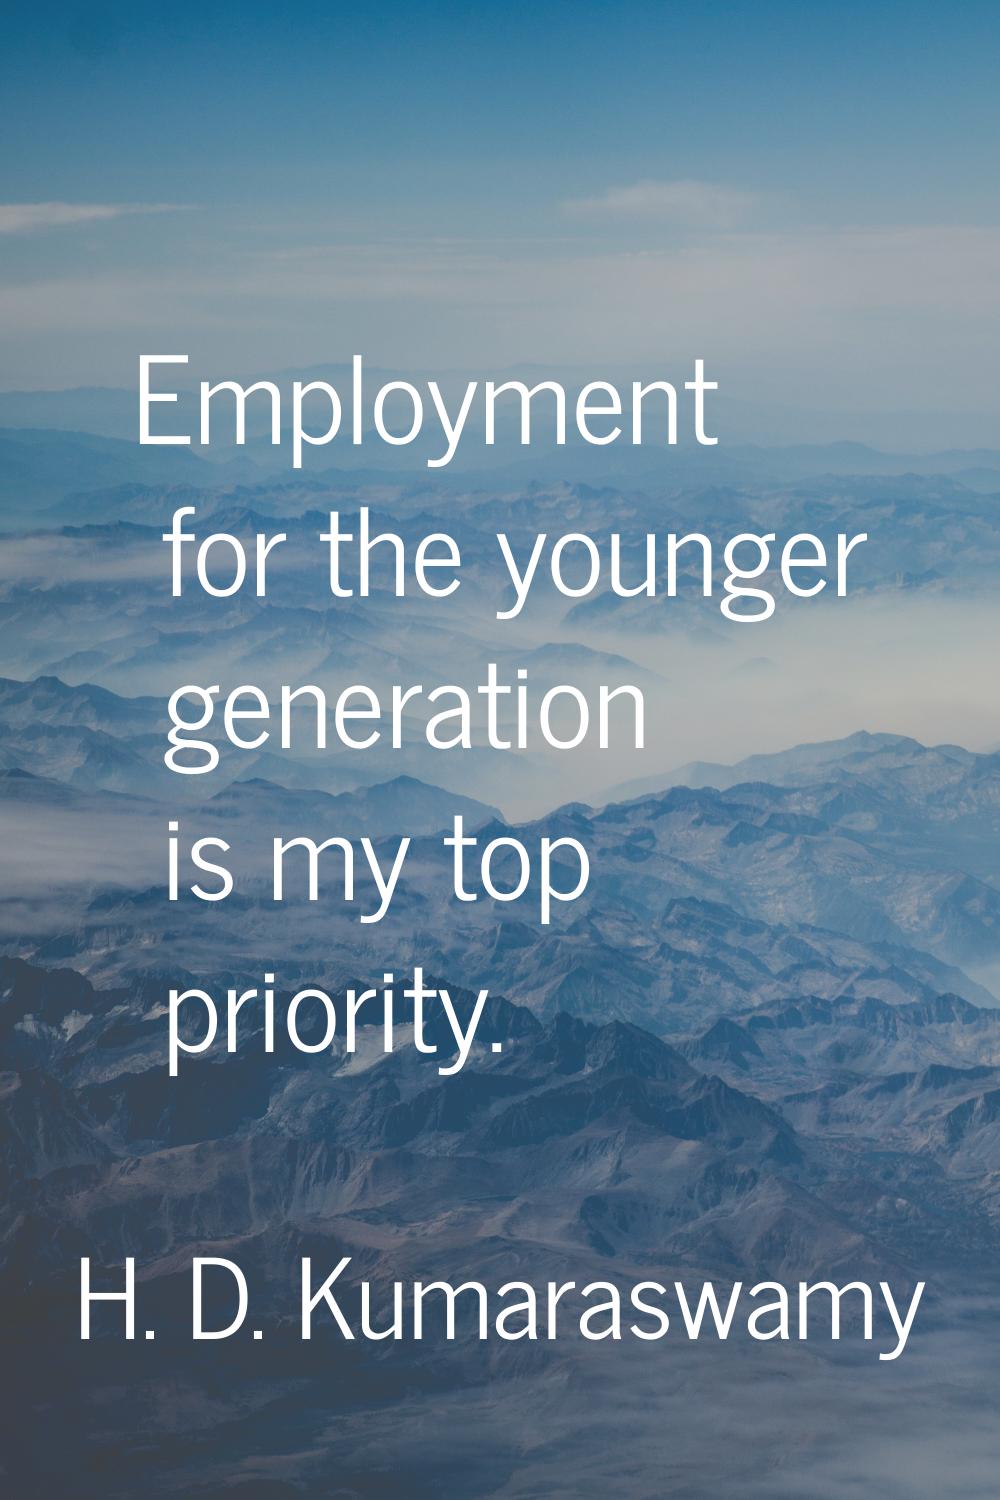 Employment for the younger generation is my top priority.